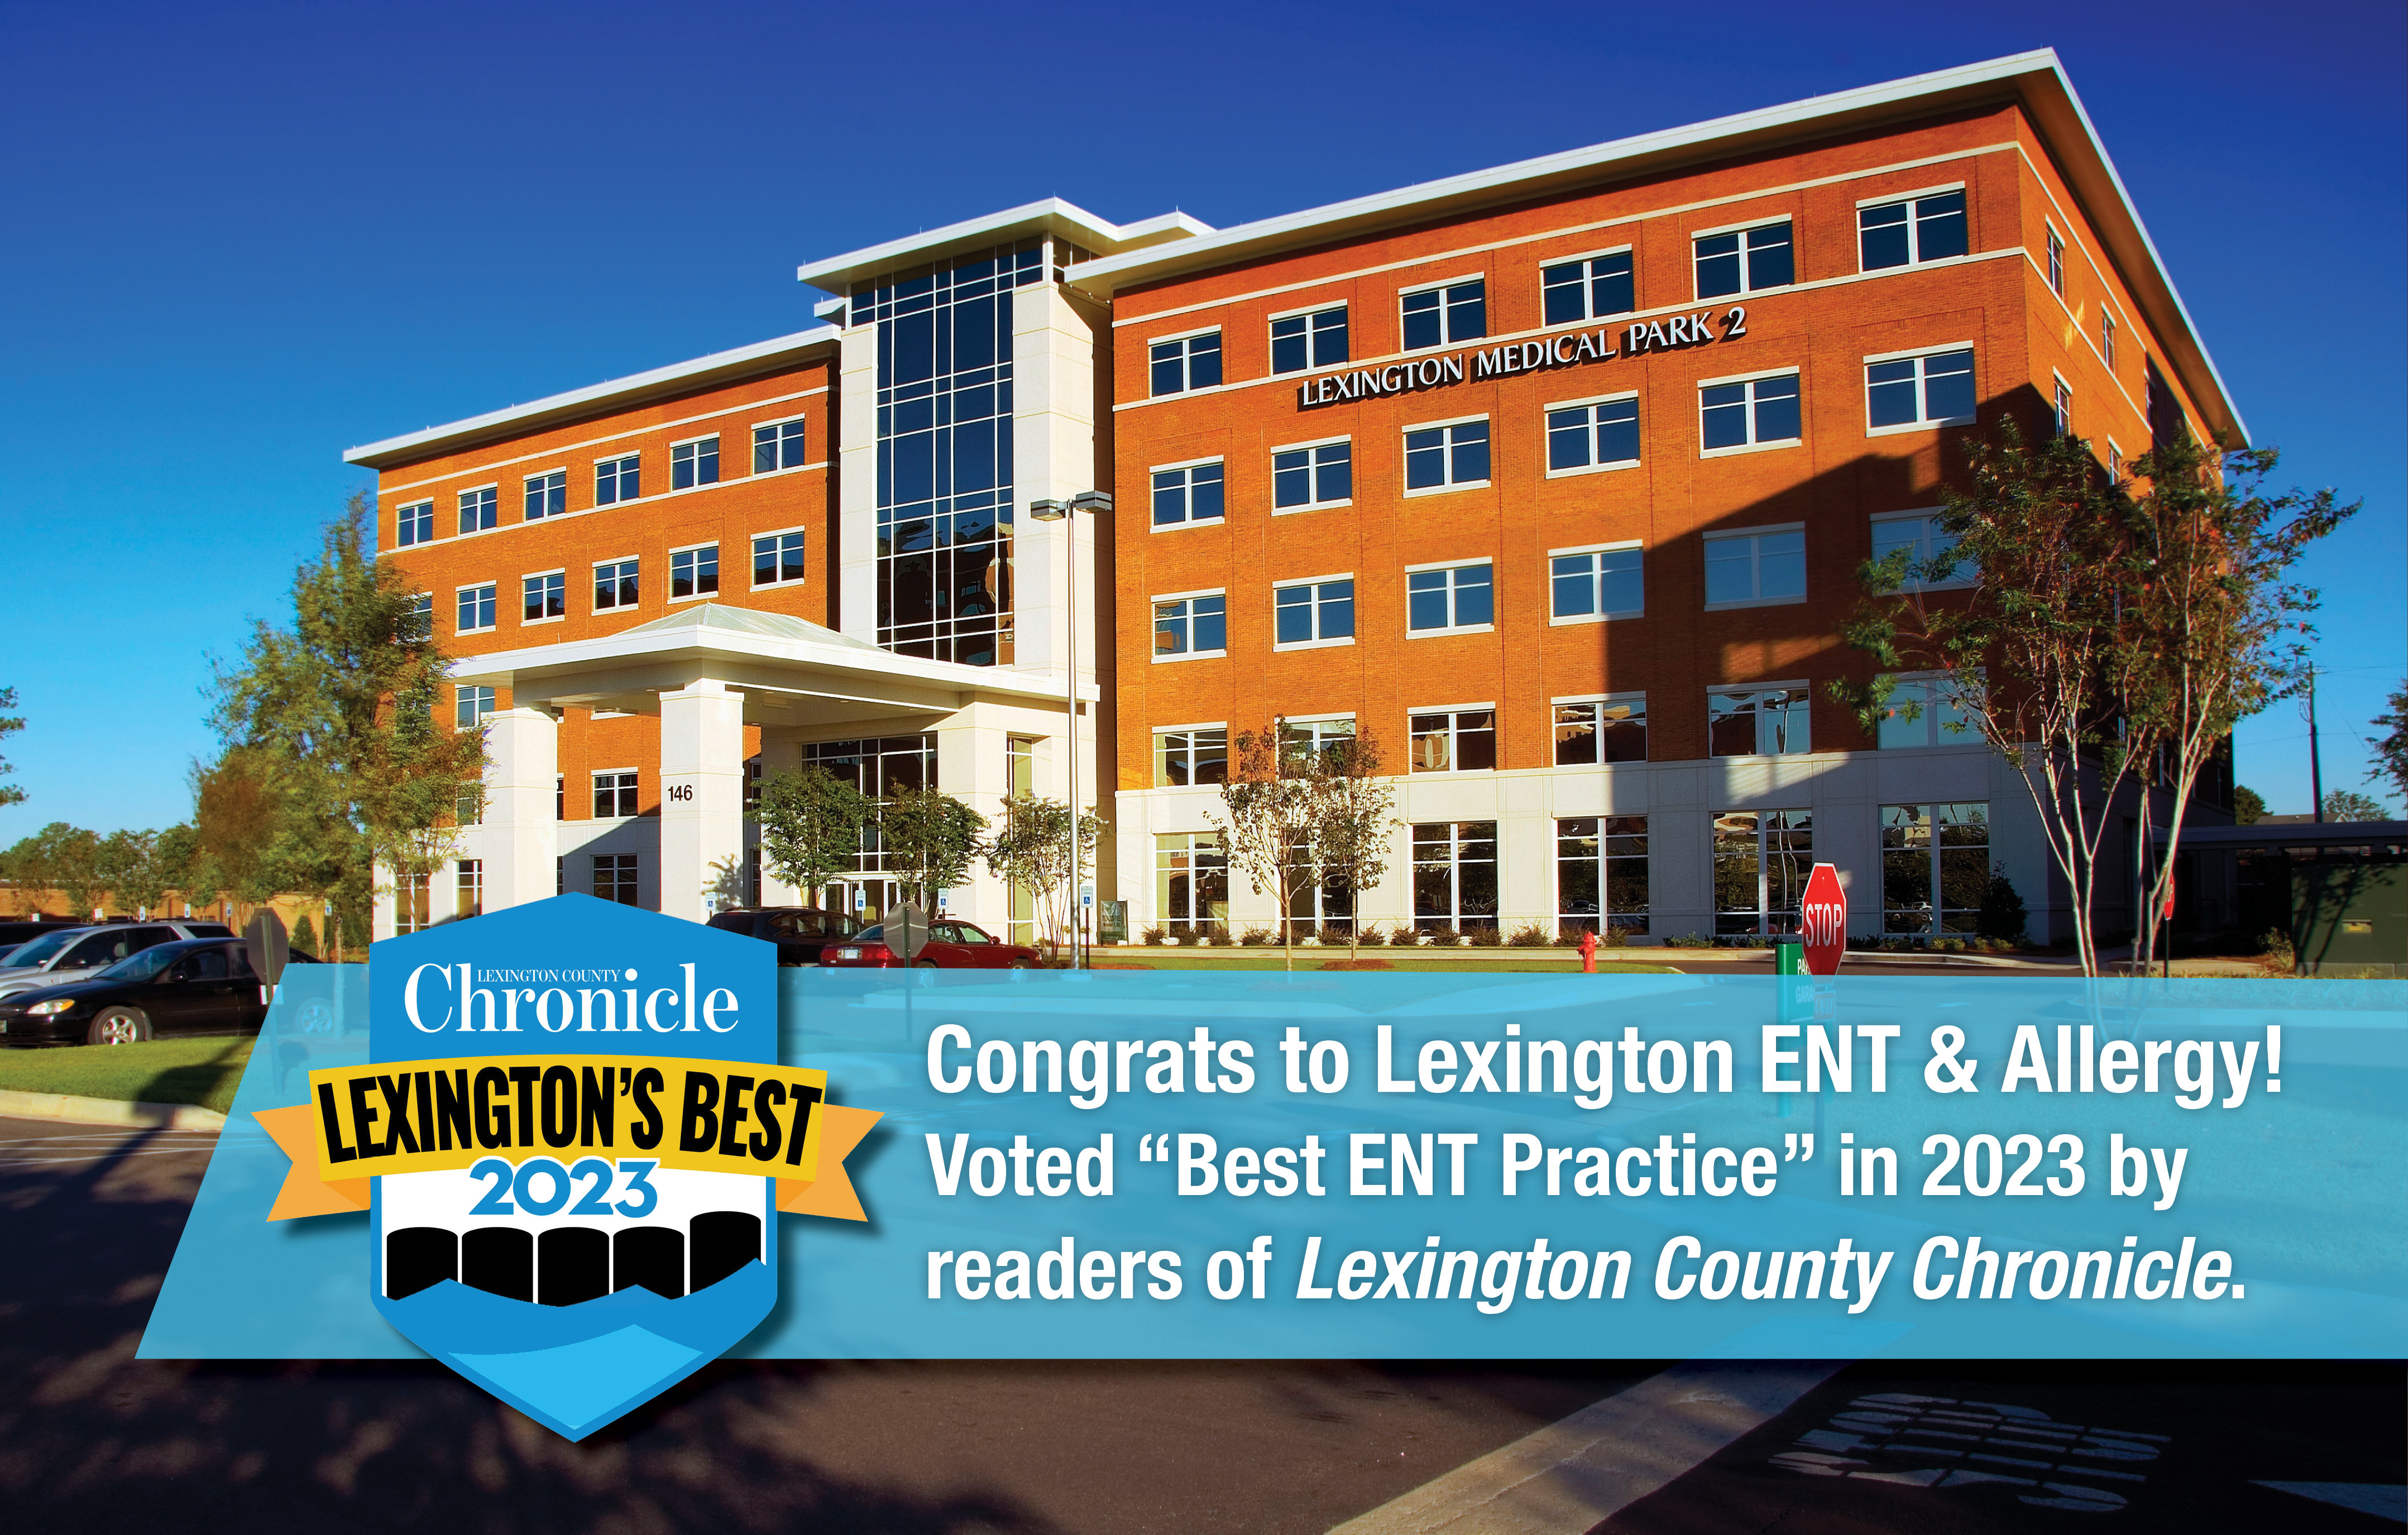 Congrats to Lexington ENT & Allergy! Voted “Best ENT Practice” in 2023 by  readers of Lexington County Chronicle.